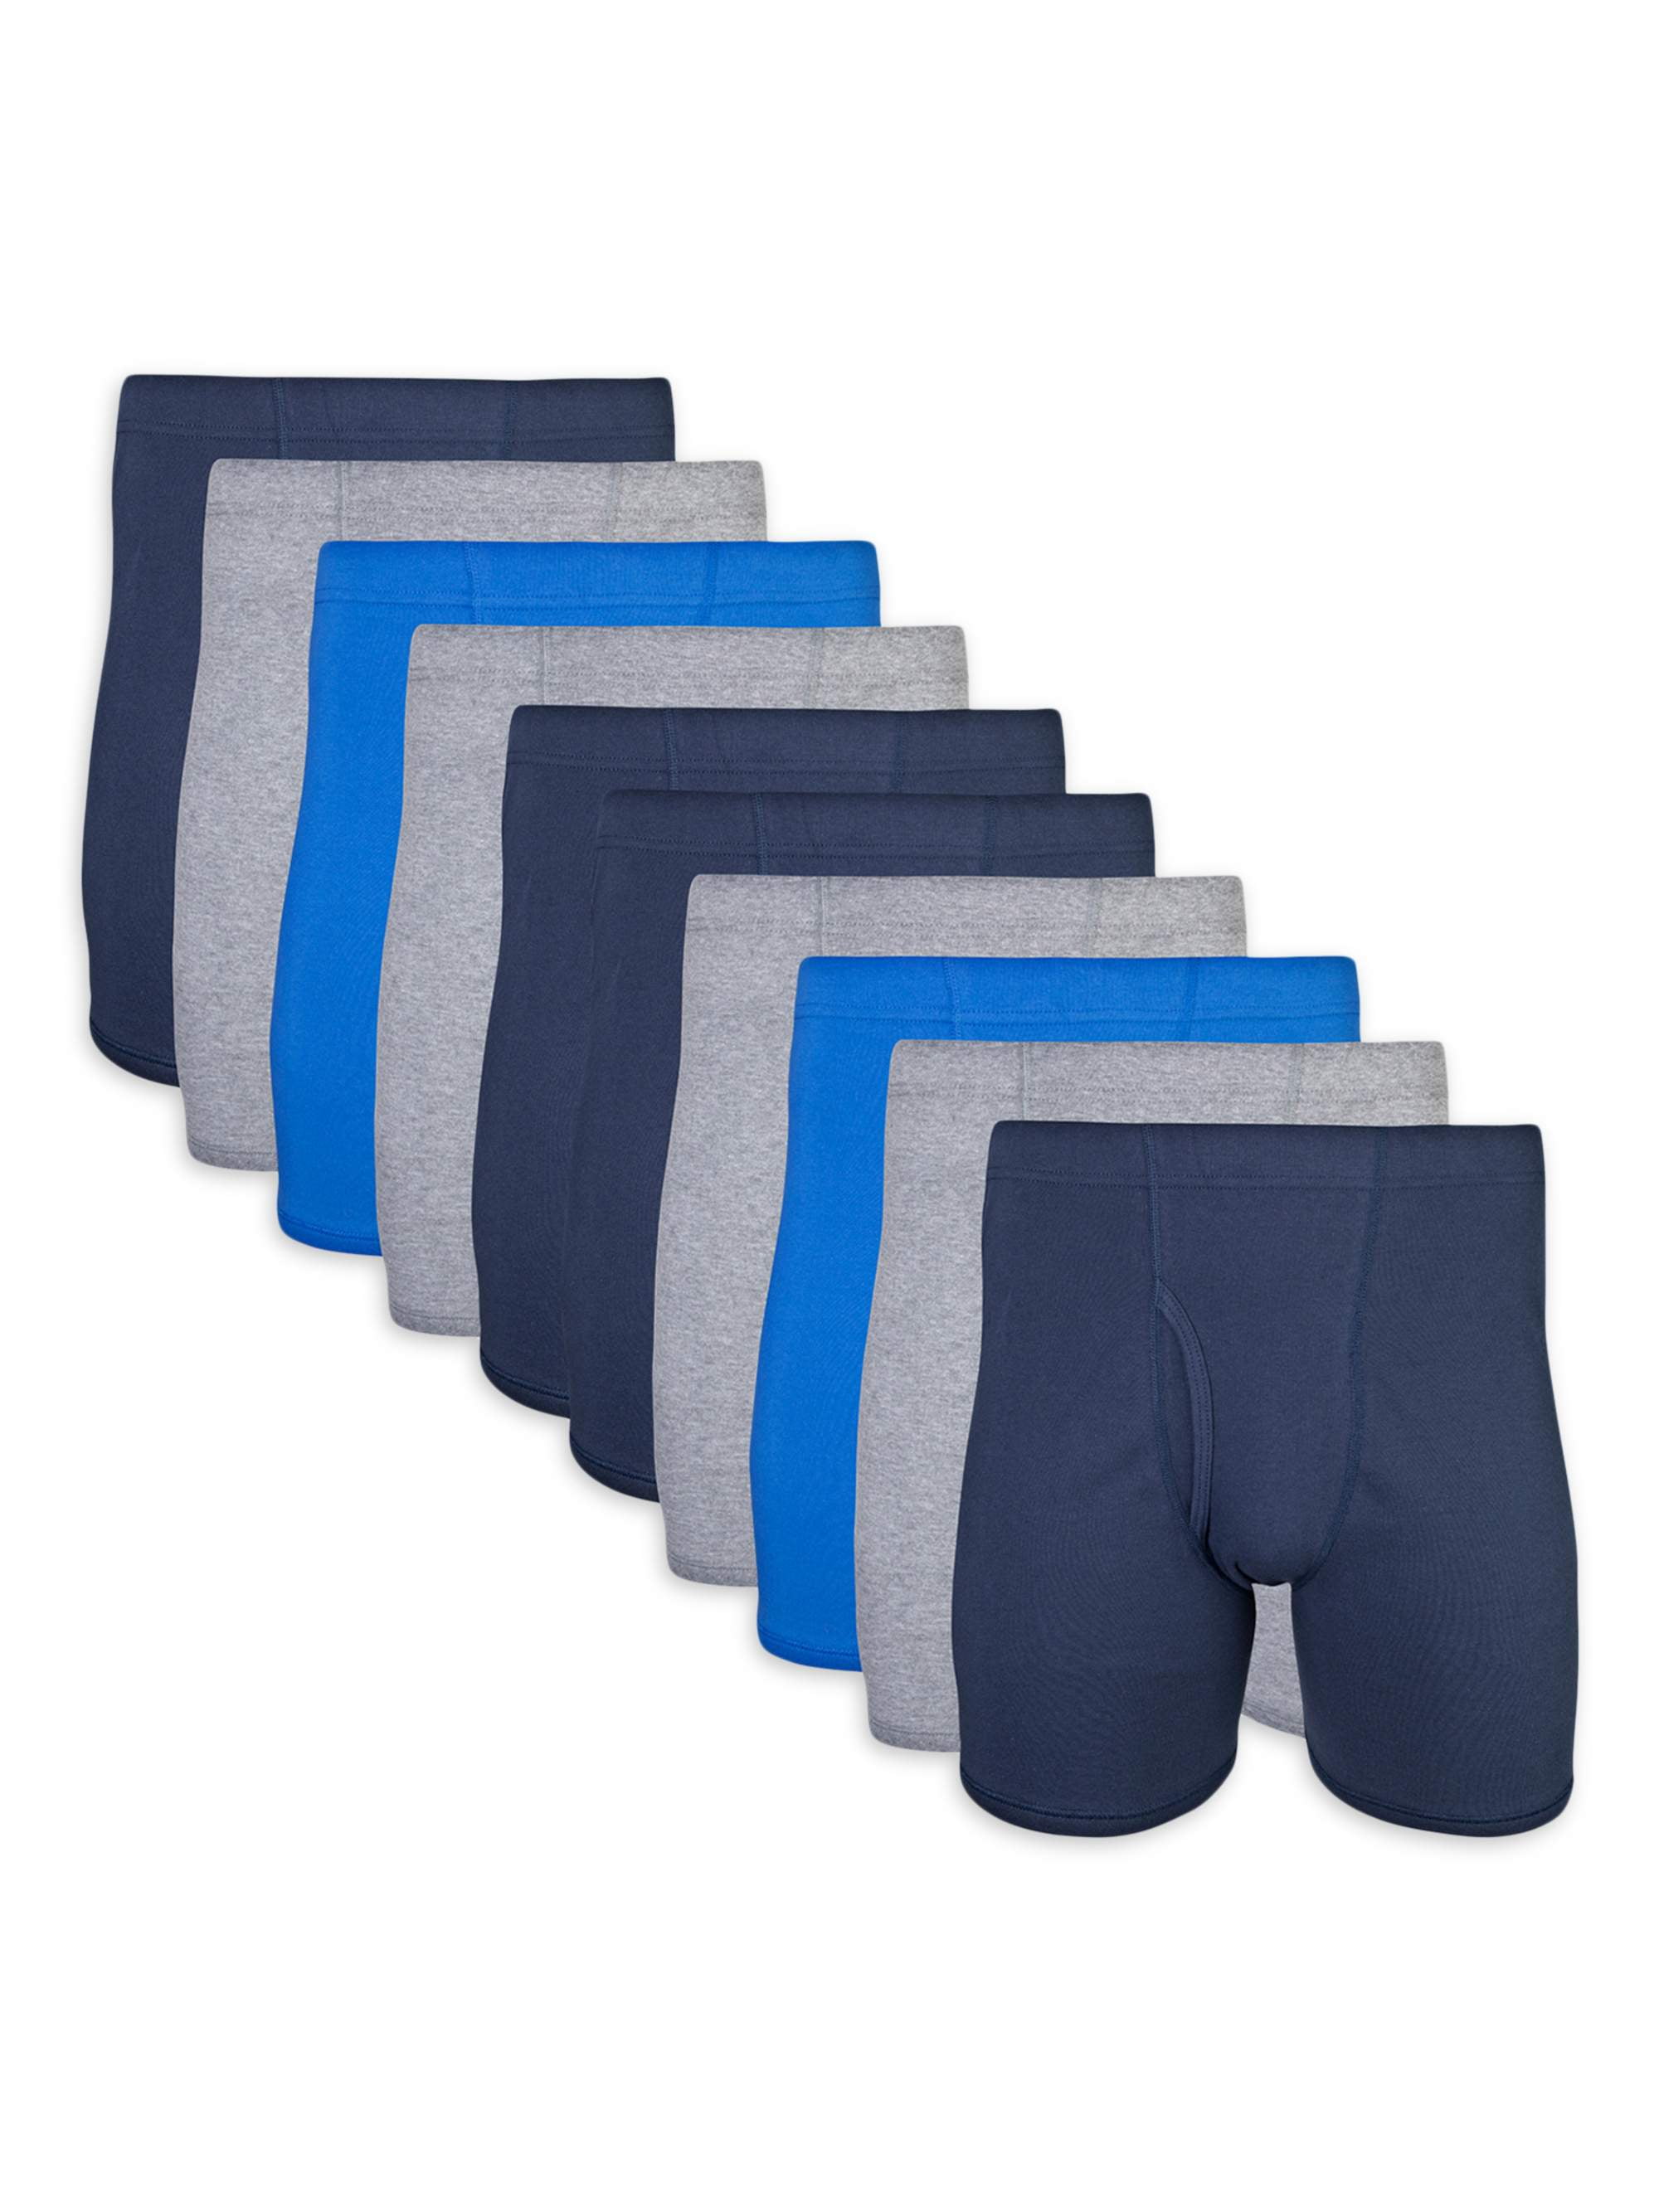 Gildan Adult Men's Boxer Briefs With Covered Waistband, 10-Pack